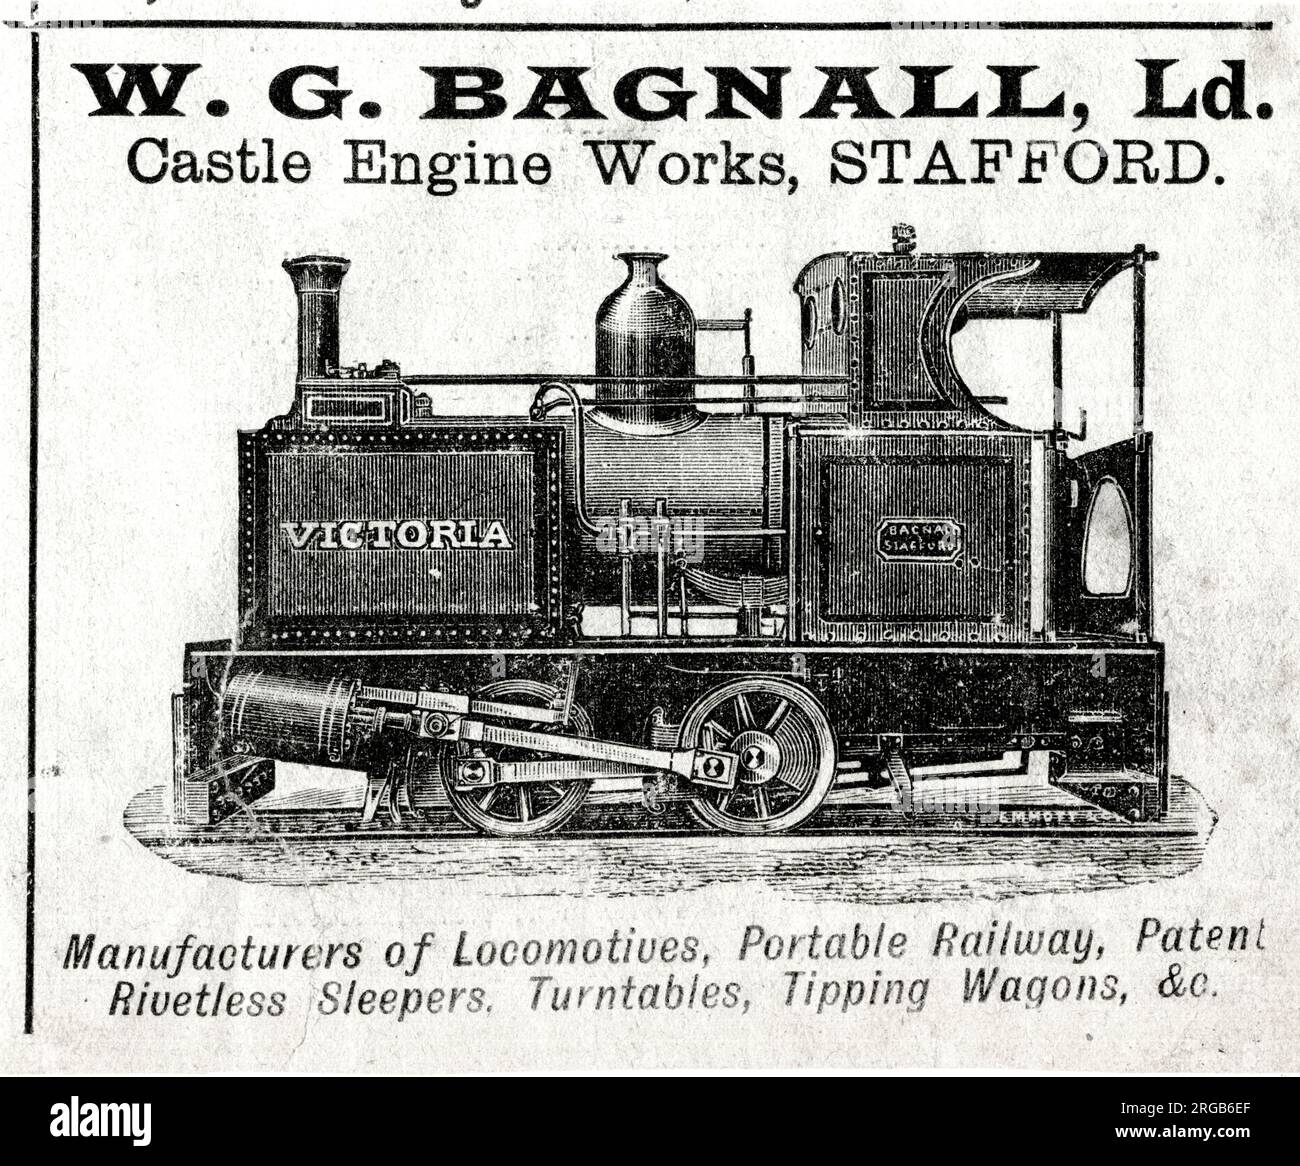 Advert, Locomotive Train 'Victoria' manufactured by Bagnall, Castle Engine Works, Stafford Stock Photo